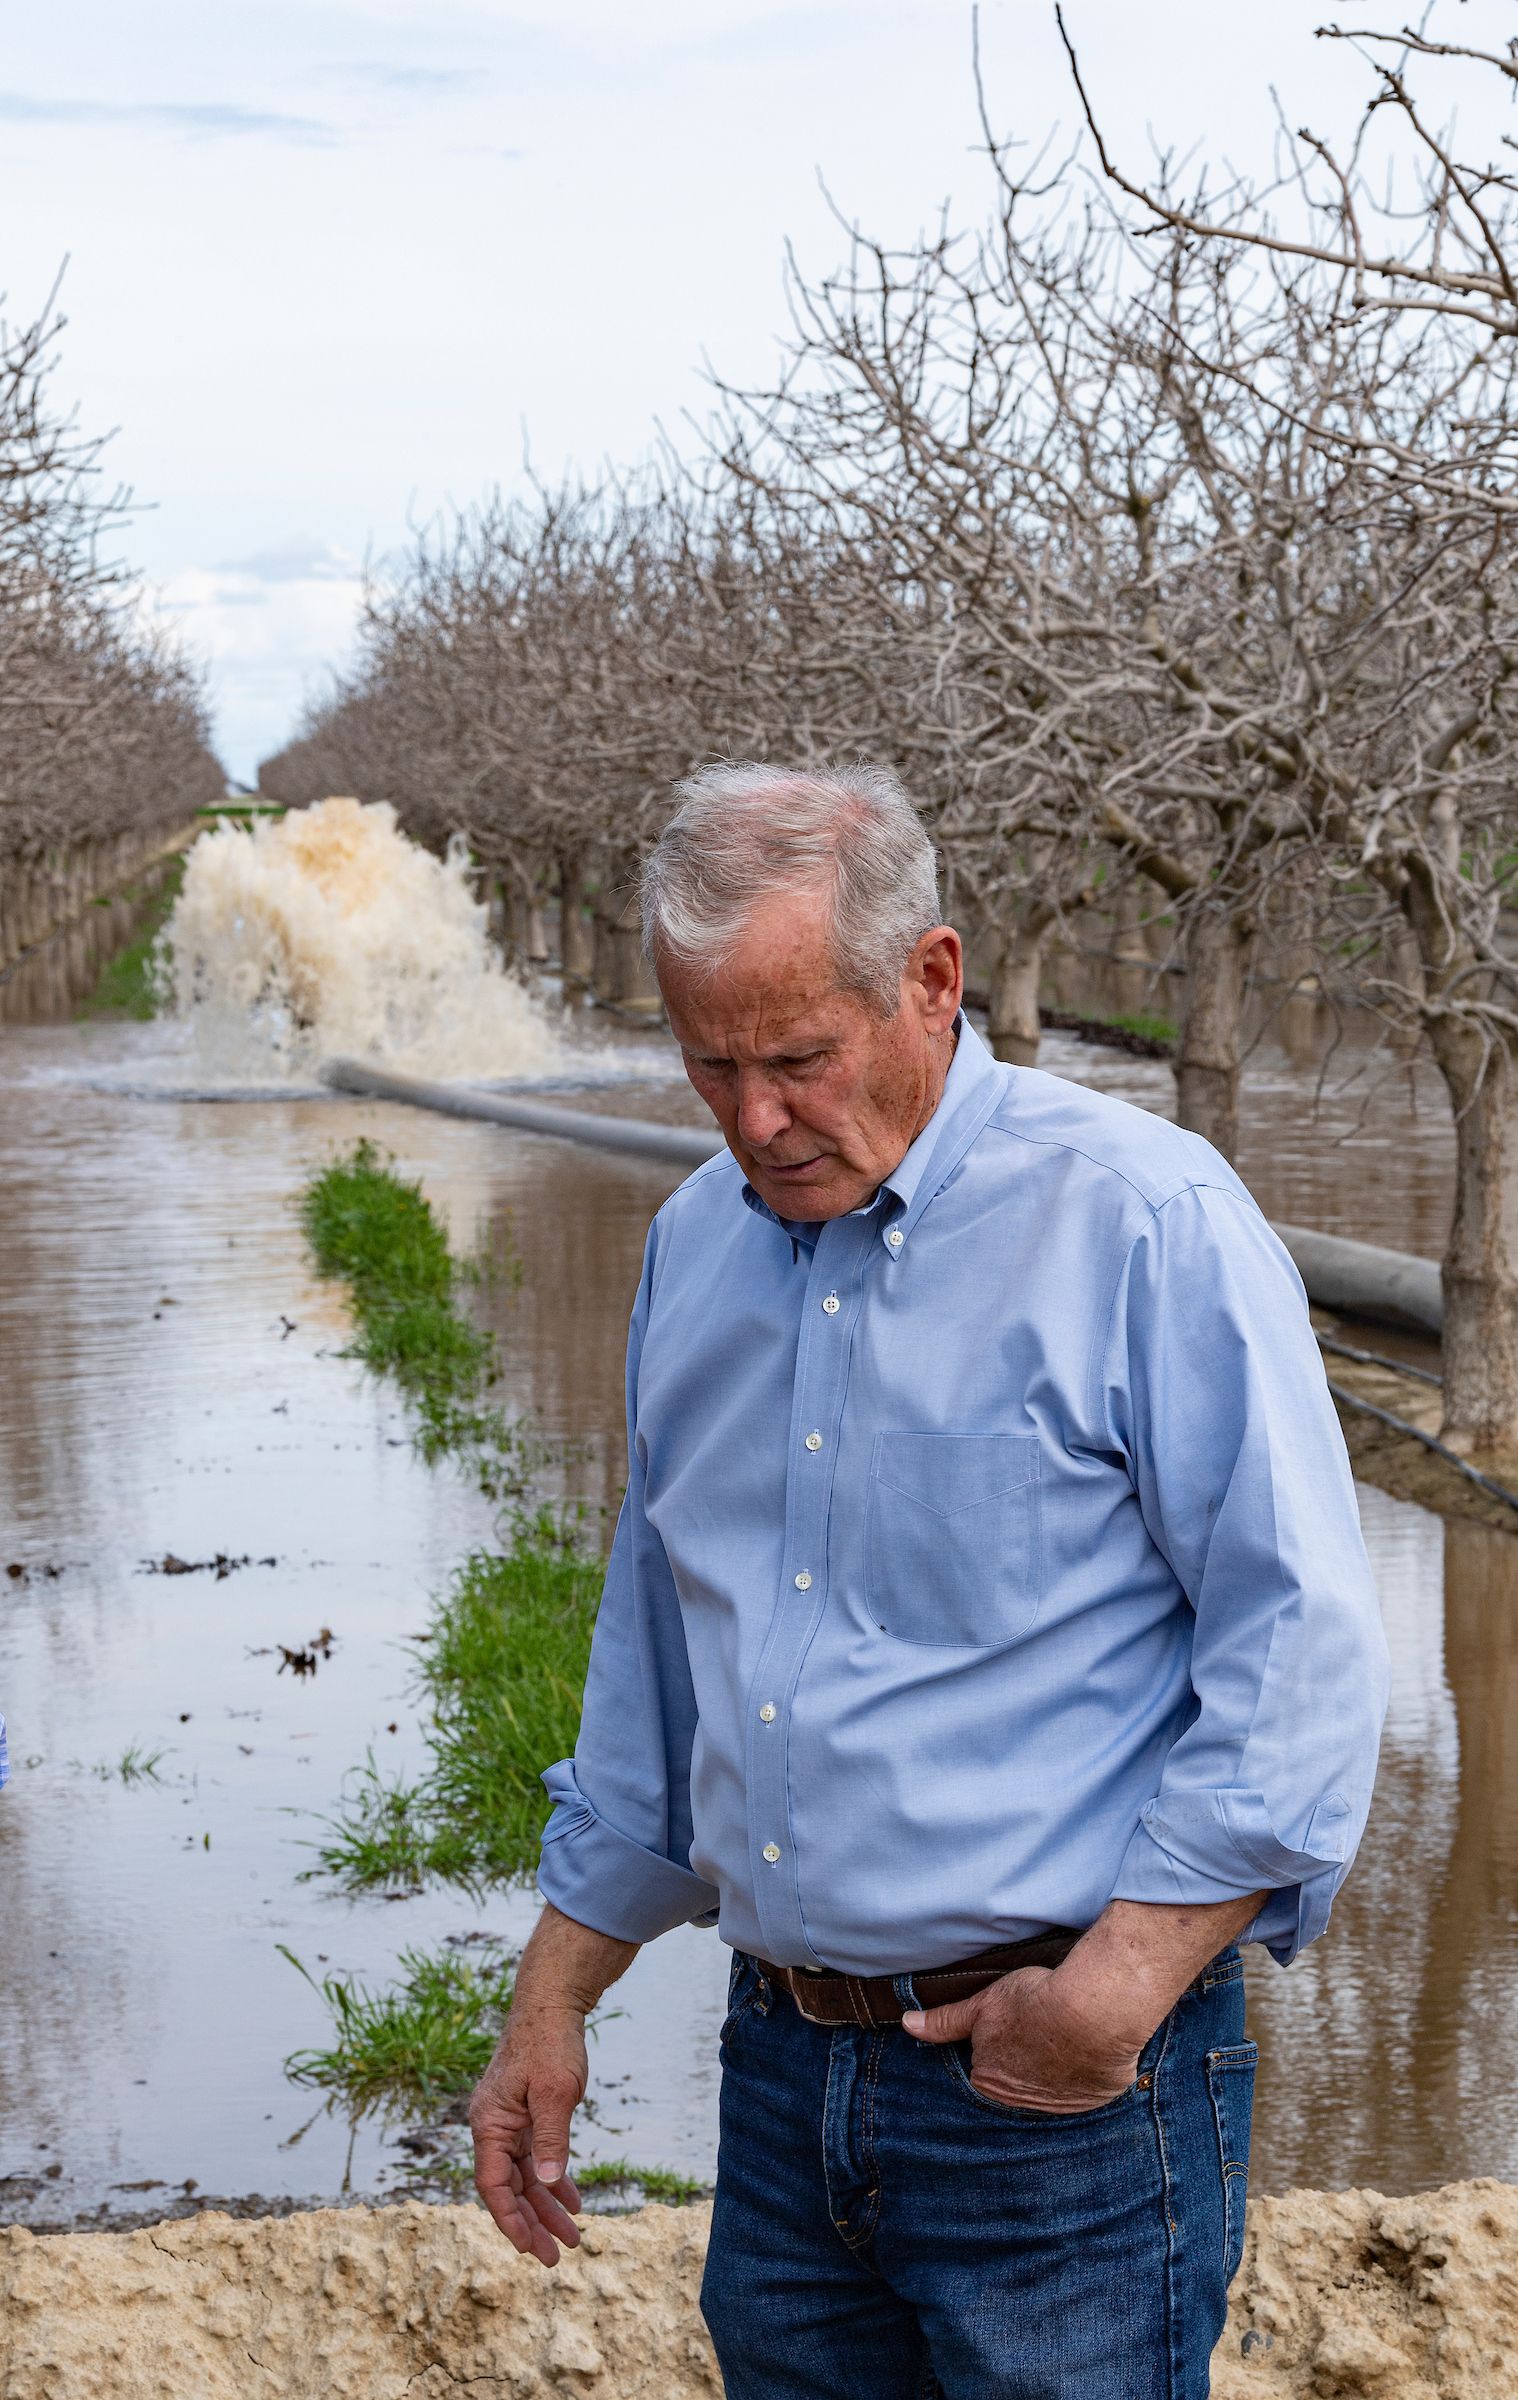 A white man with gray hair wearing a blue oxford shirt and jeans stands in front of a pipeline sending water into a dormant pistachio orchard